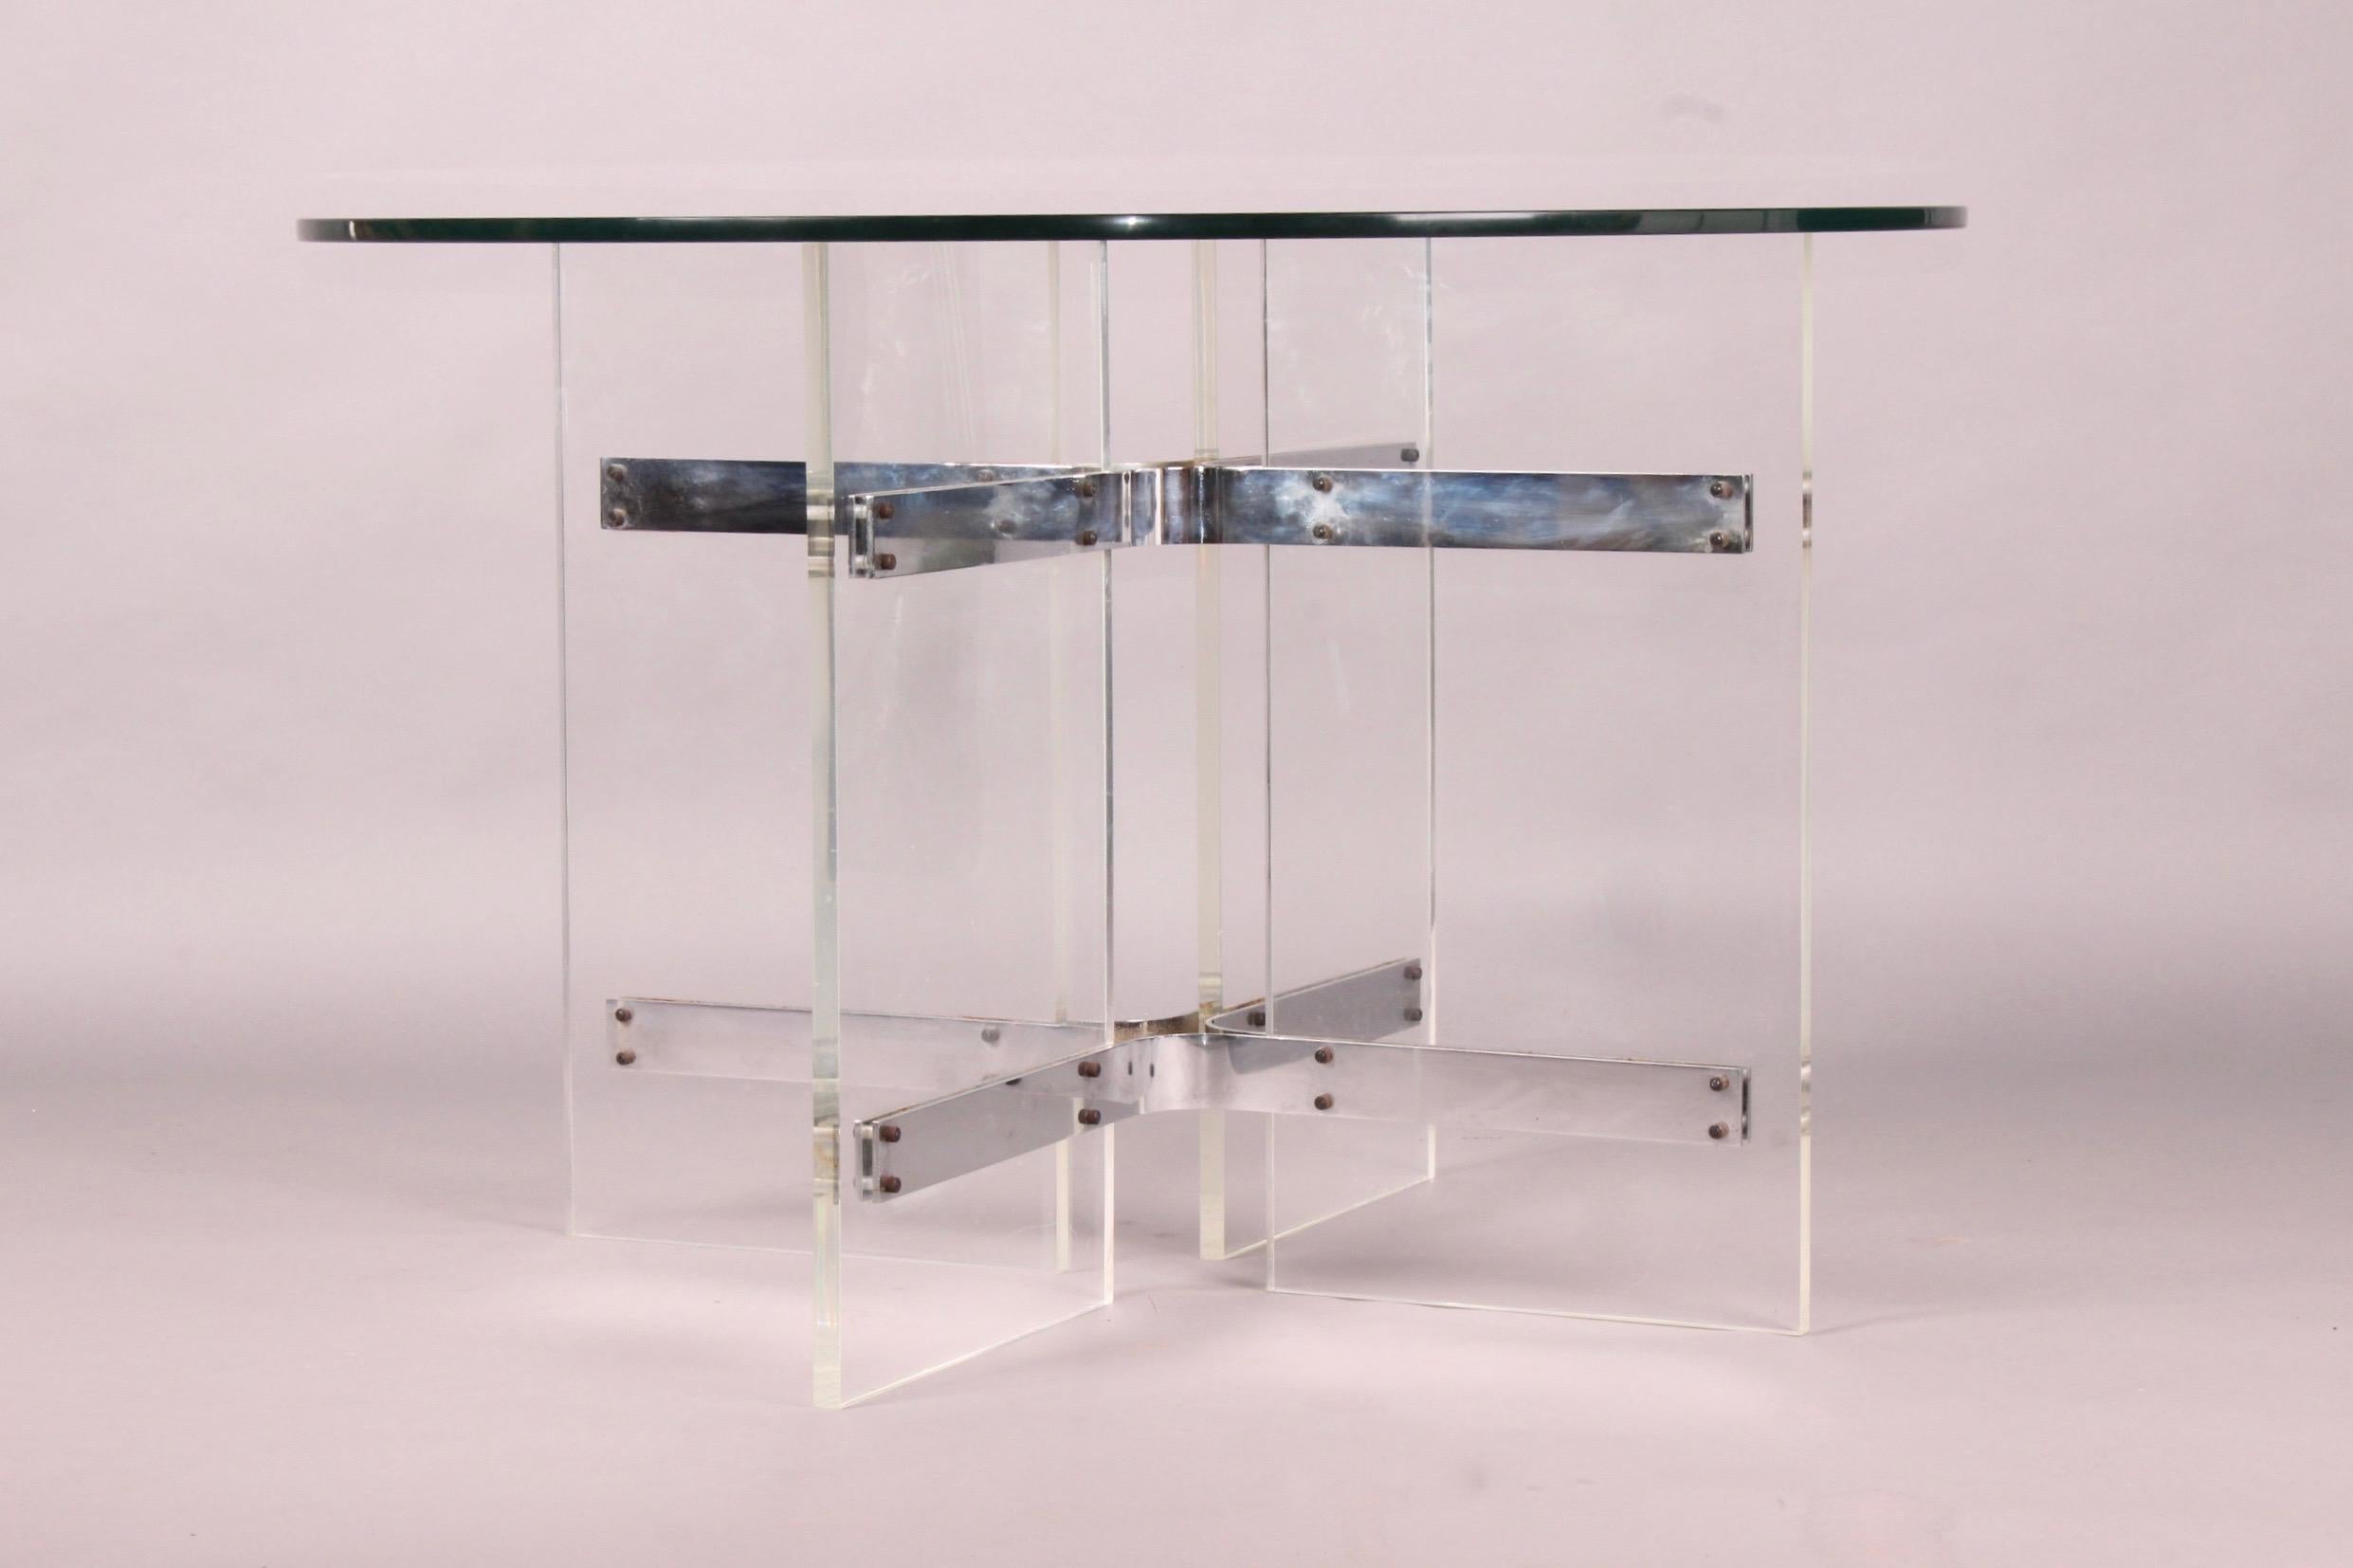 Plexiglass and glass dinning table, dimensions with out glass. Measures: H 71 by 92 by 92 cm.